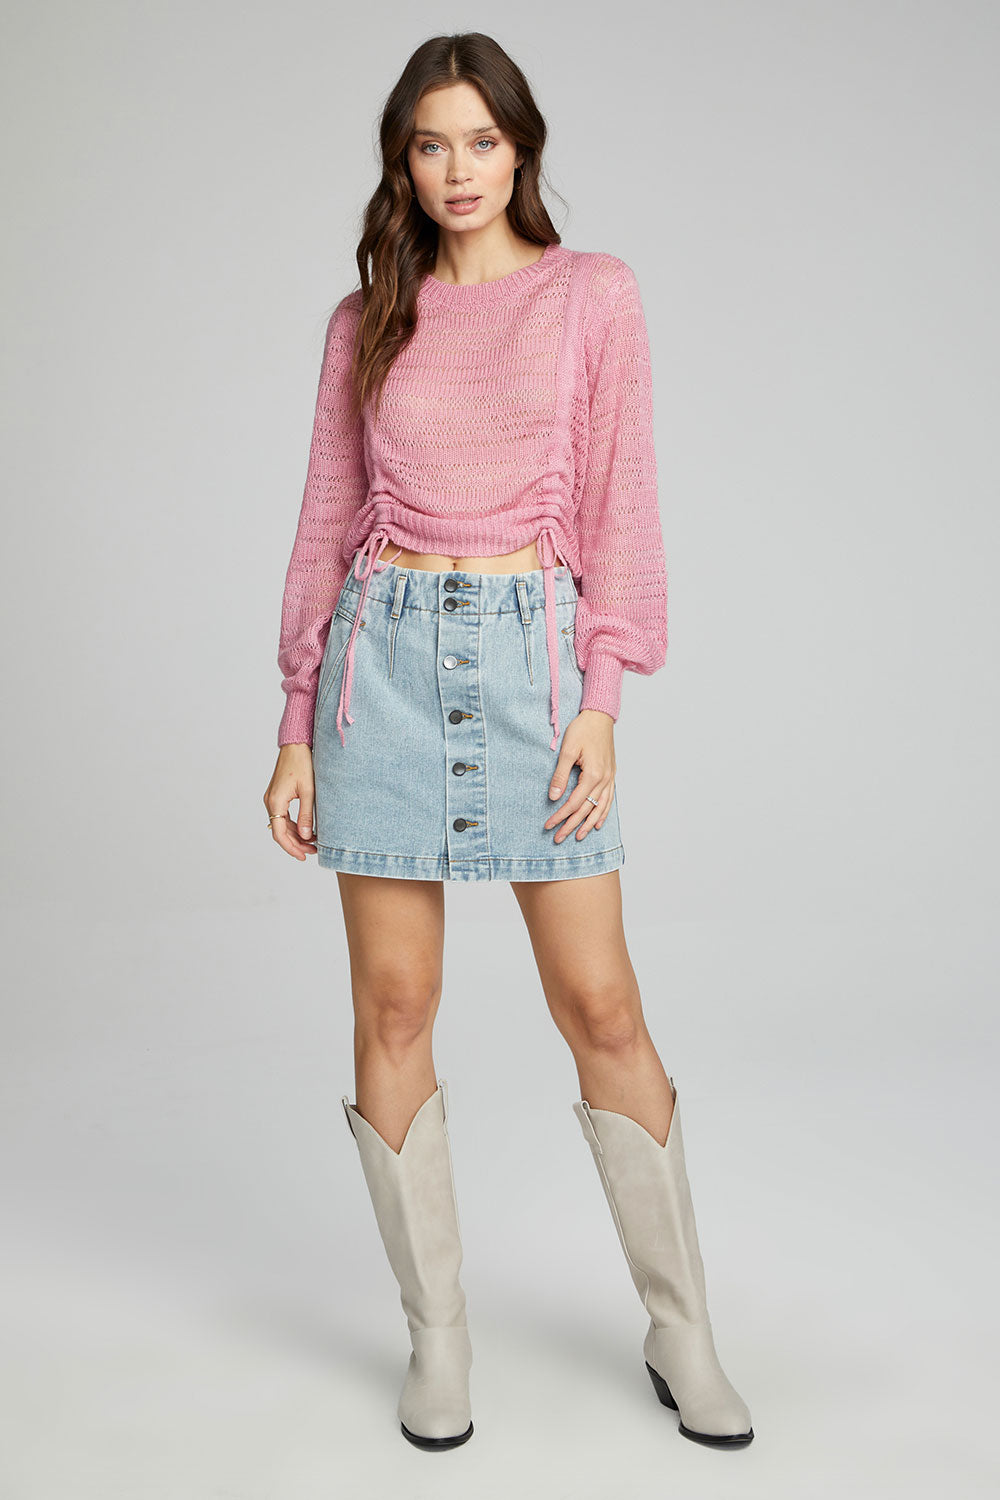 Saltwater Luxe | Mable Sweater | Pink